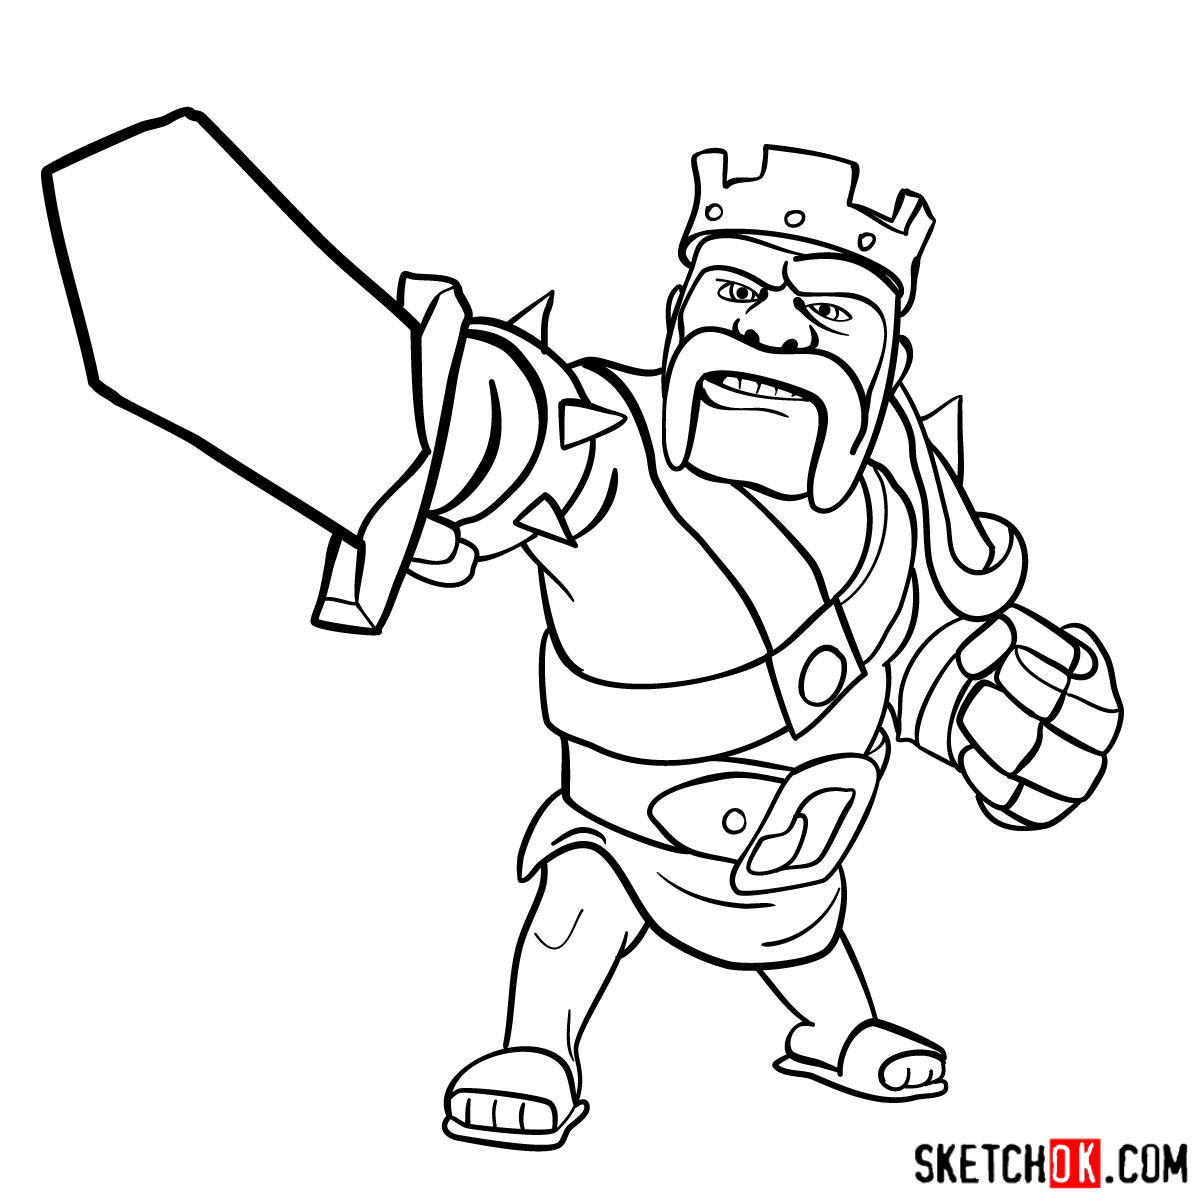 How to draw Barbarian King from CoC Step by step drawing tutorials